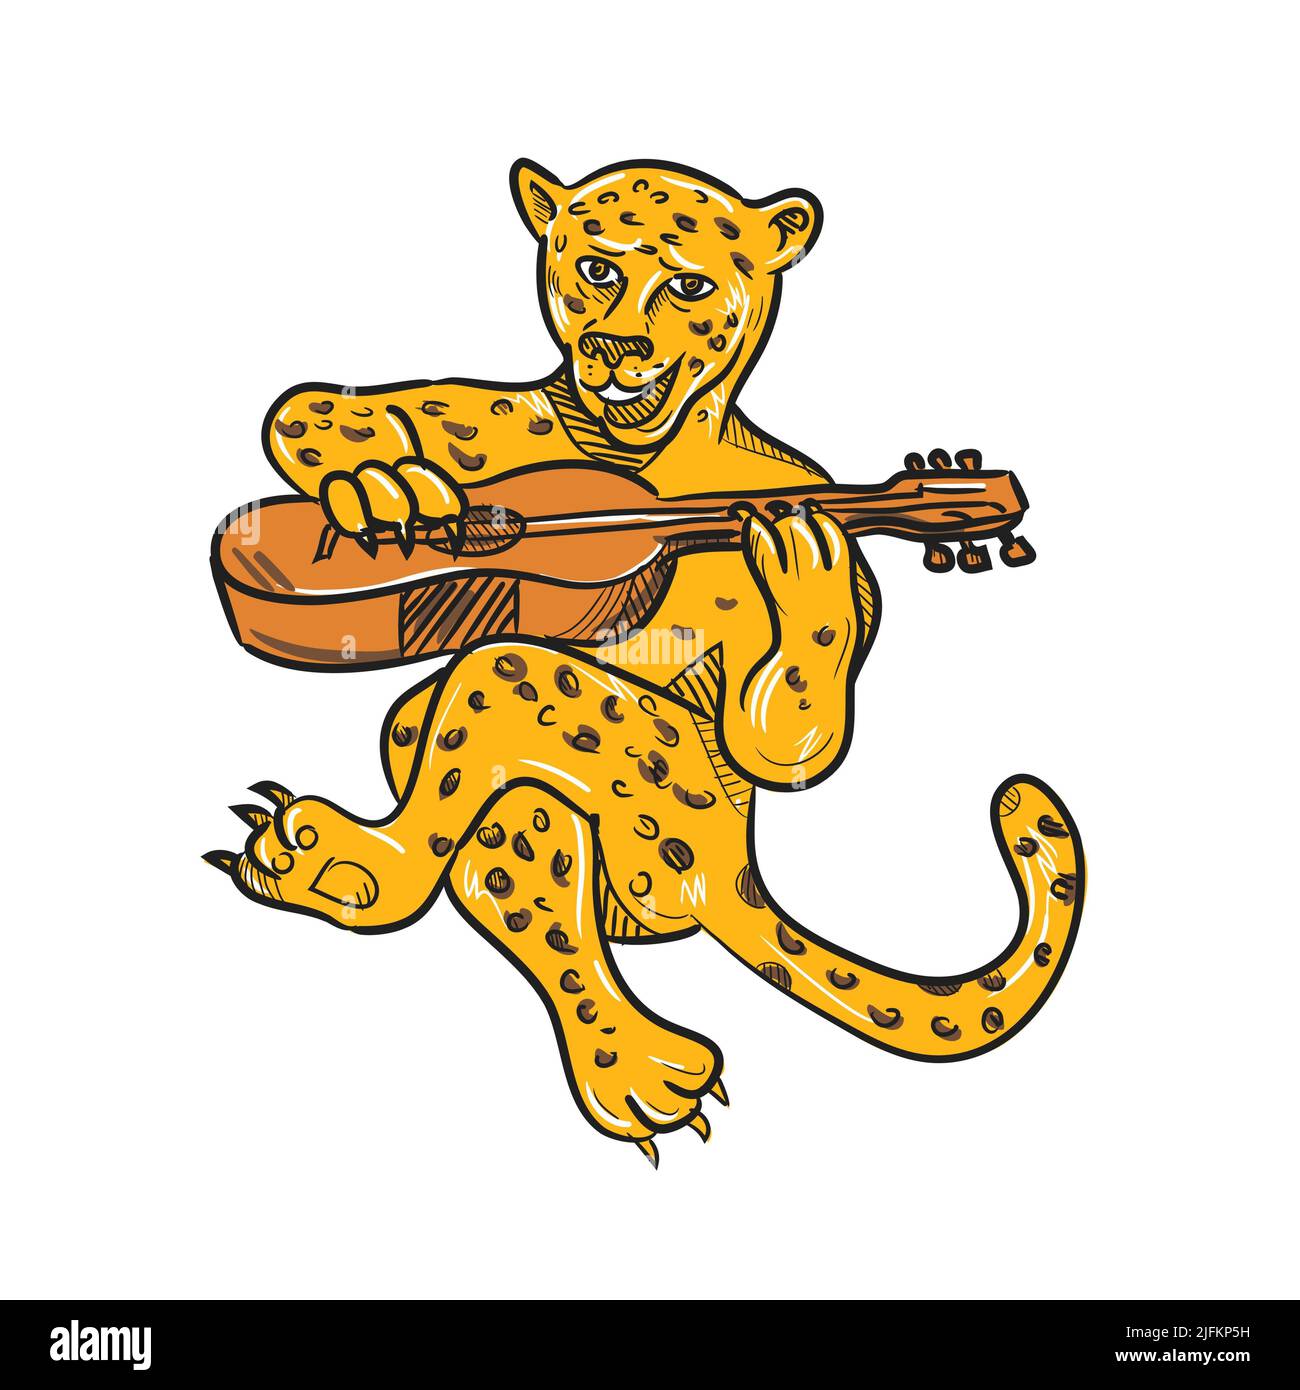 Cartoon style illustration of a happy jaguar or leopard playing an acoustic guitar while being seated or sitting down done in full color on isolated Stock Photo